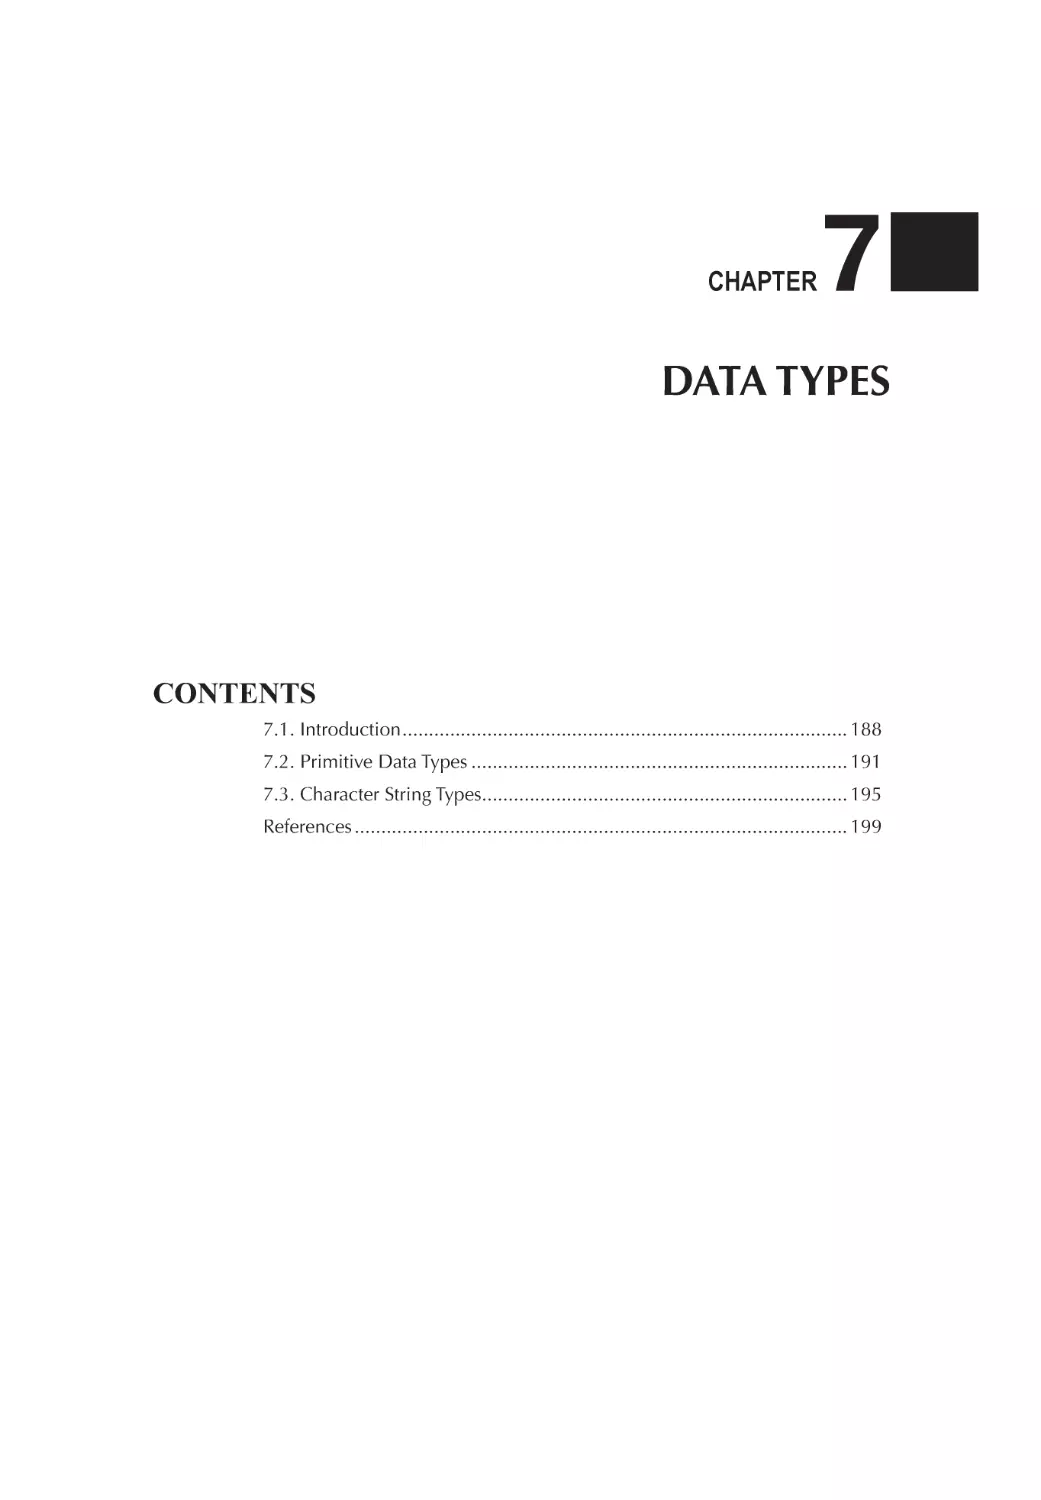 Chapter 7 Data Types